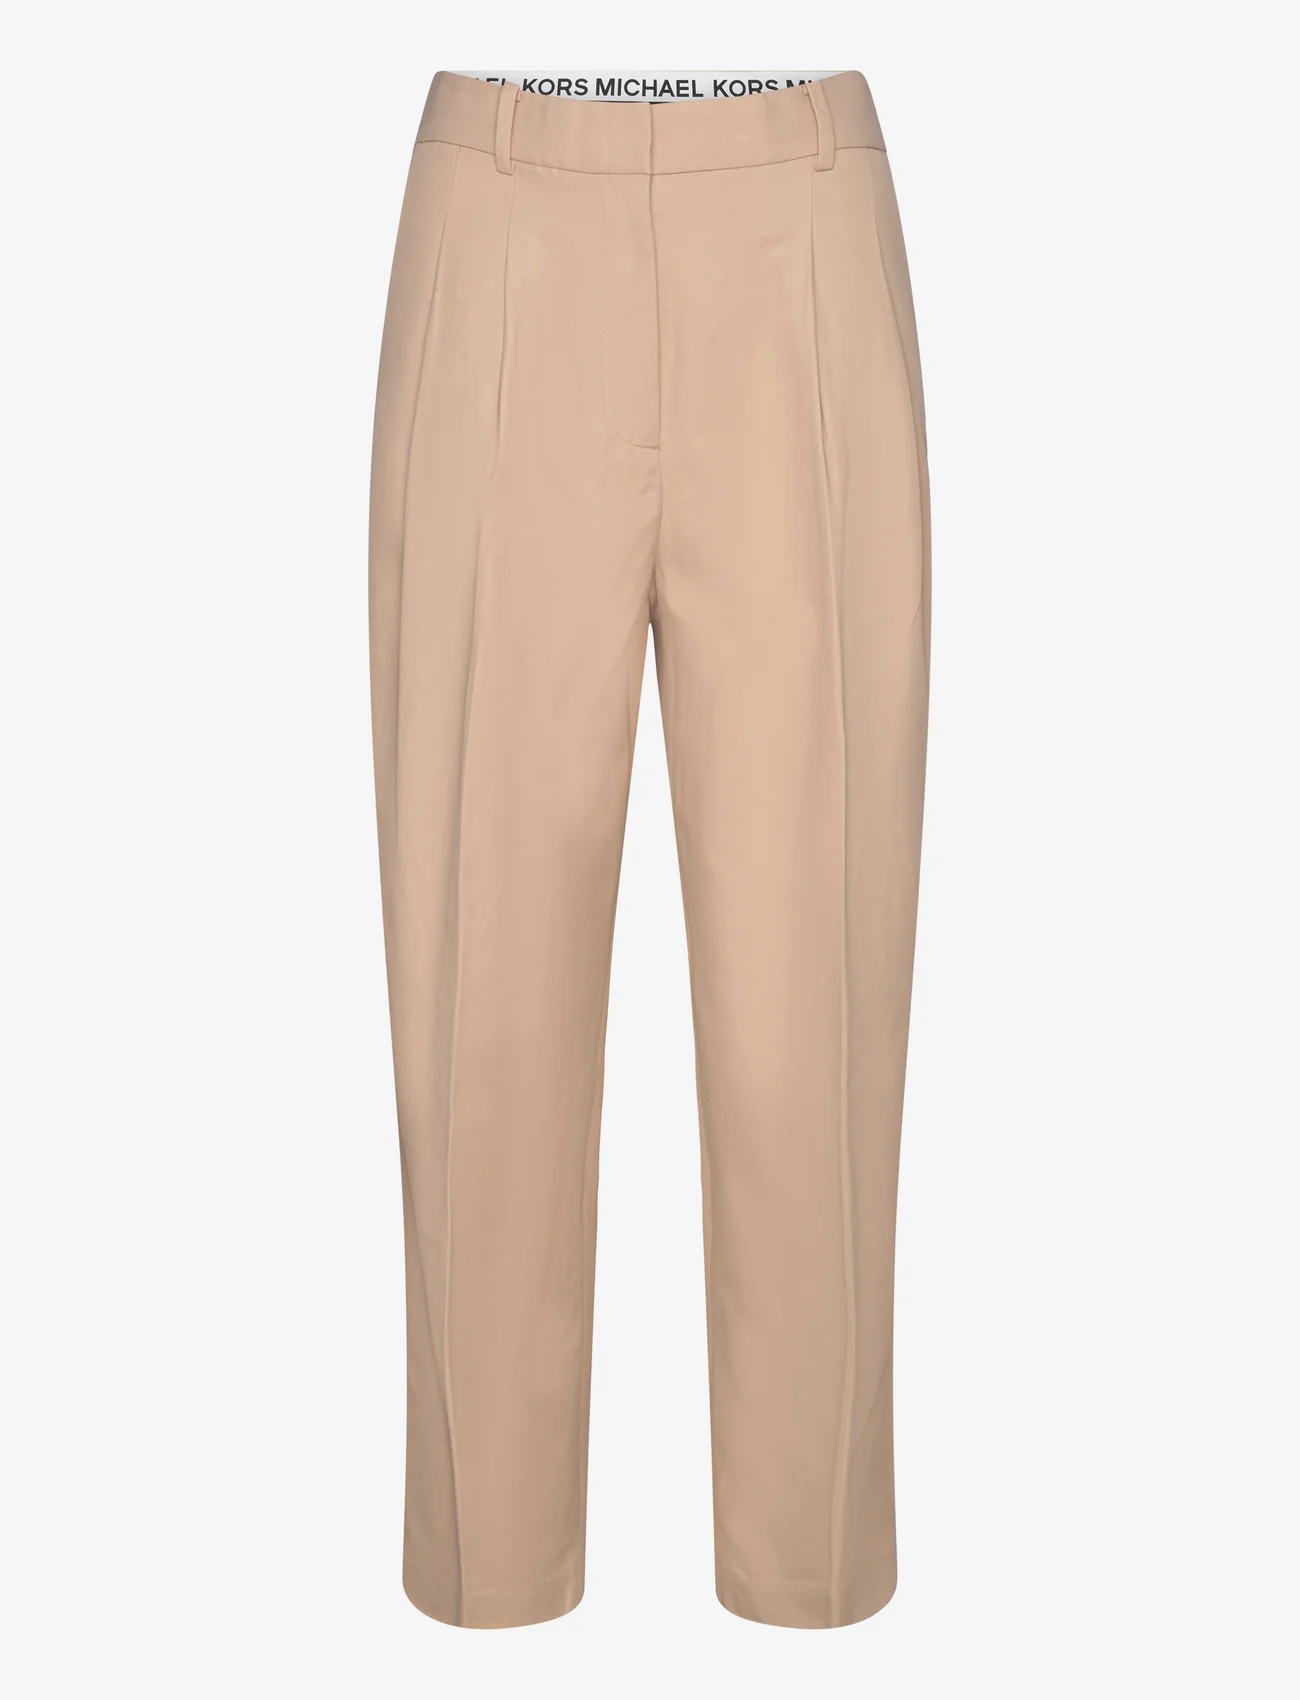 Michael Kors - PLEATED ANKLE PANT - chinosy - buff - 0